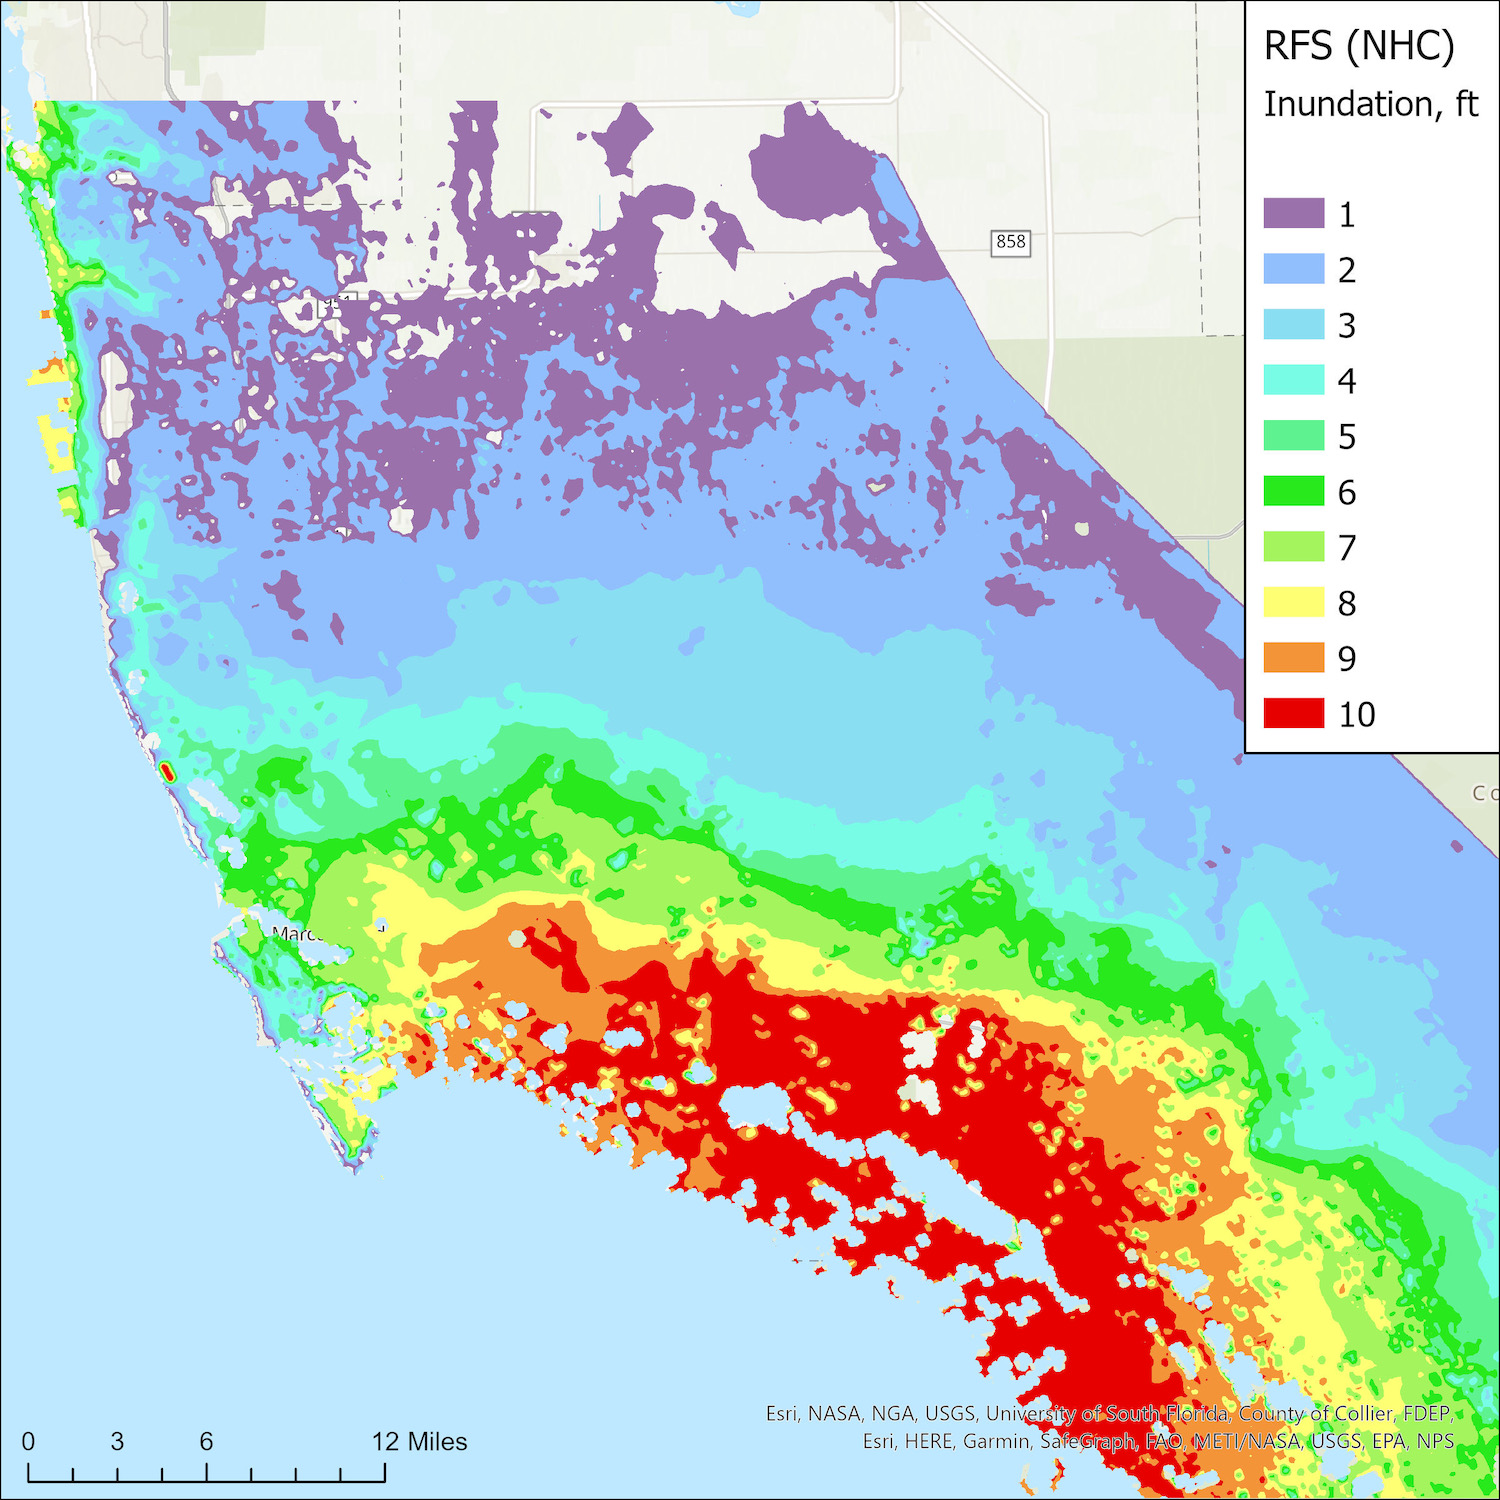 On the morning of September 28, the Rapid Forecasting System predicted Collier County’s maximum storm surge inundation from Hurricane Ian based on the National Hurricane Center forecast track. Courtesy of Peter Sheng and Vladimir Paramygin.